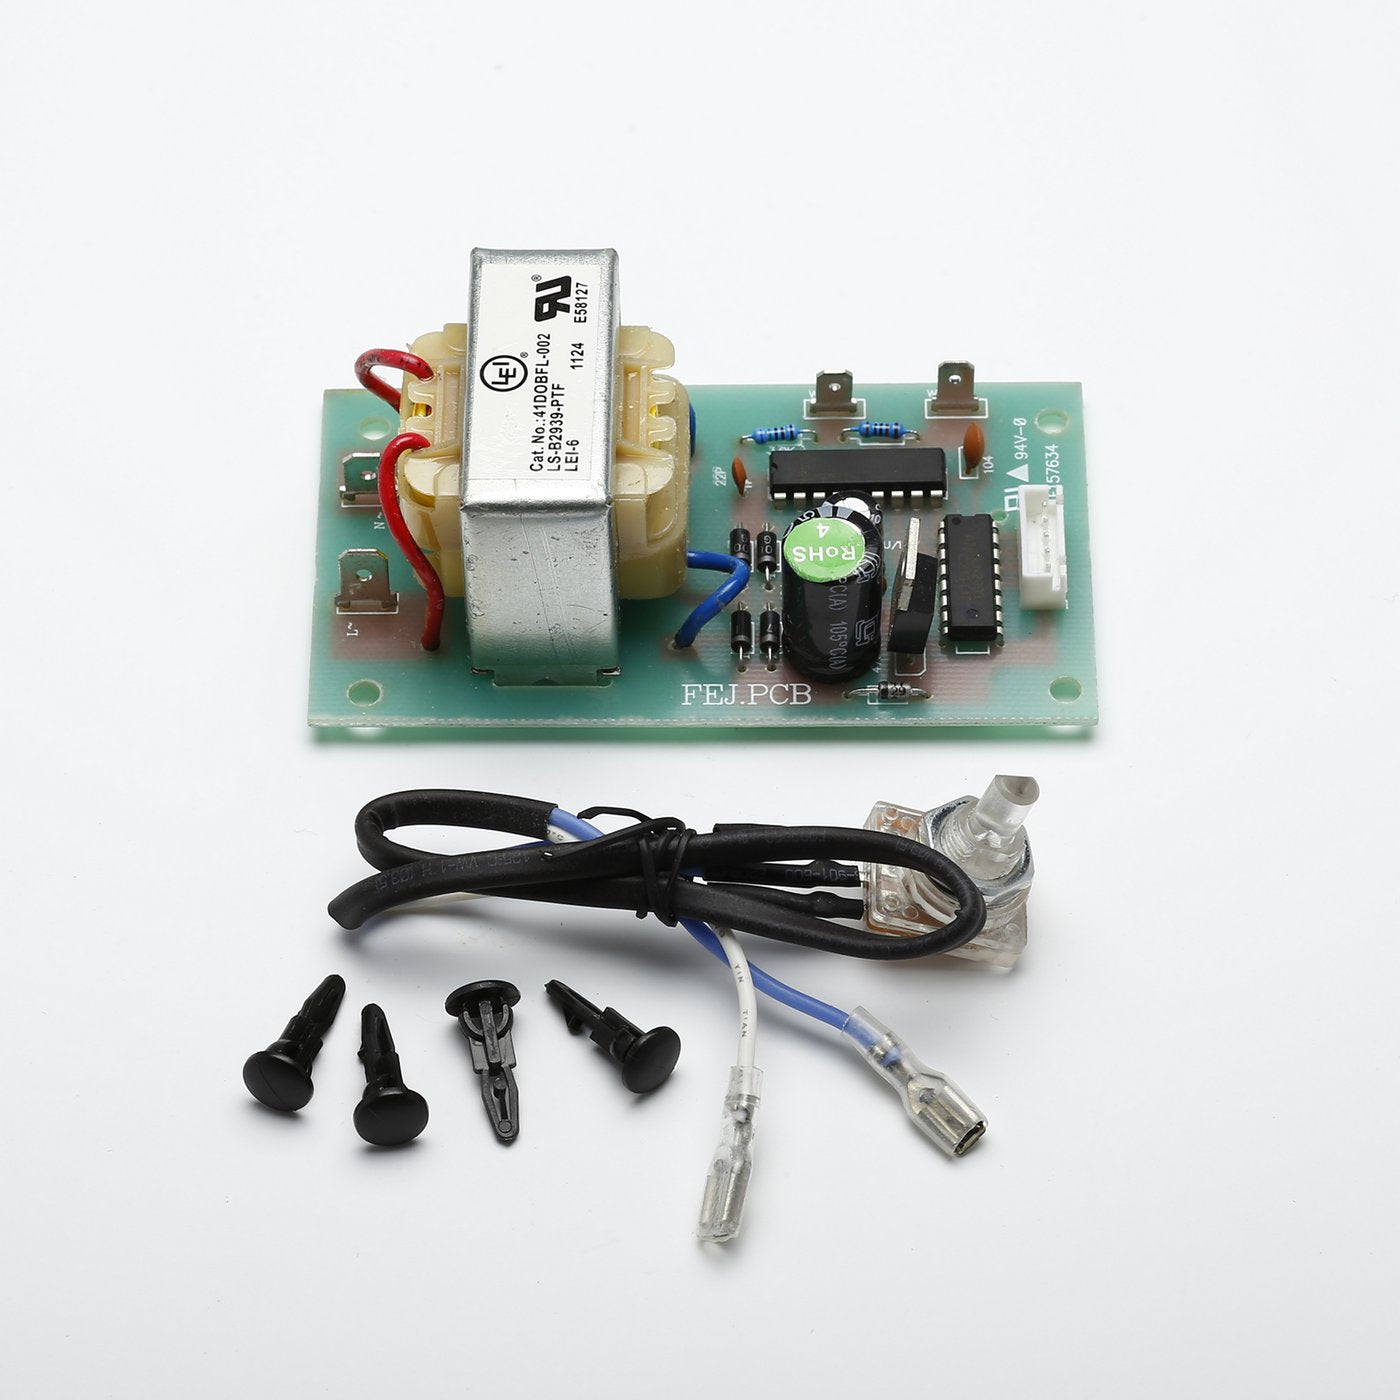 Dimplex Replacement Part, Stepper Motor Control 3000240100RP, Compatible with DF3015 and DFB6017